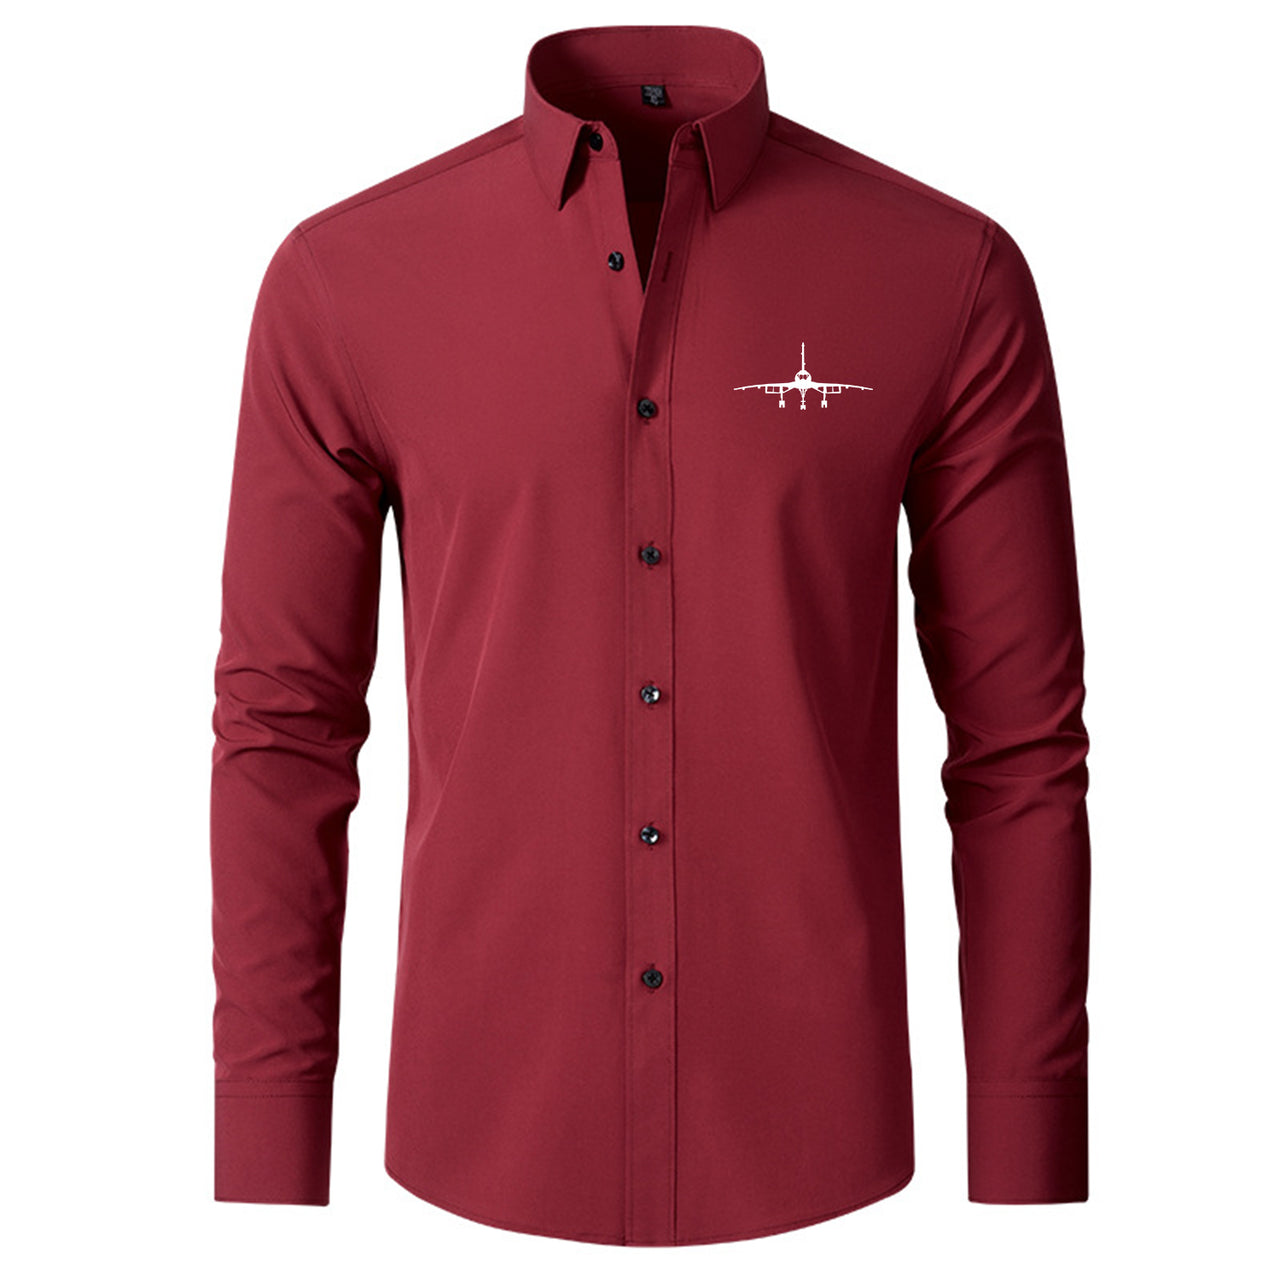 Concorde Silhouette Designed Long Sleeve Shirts